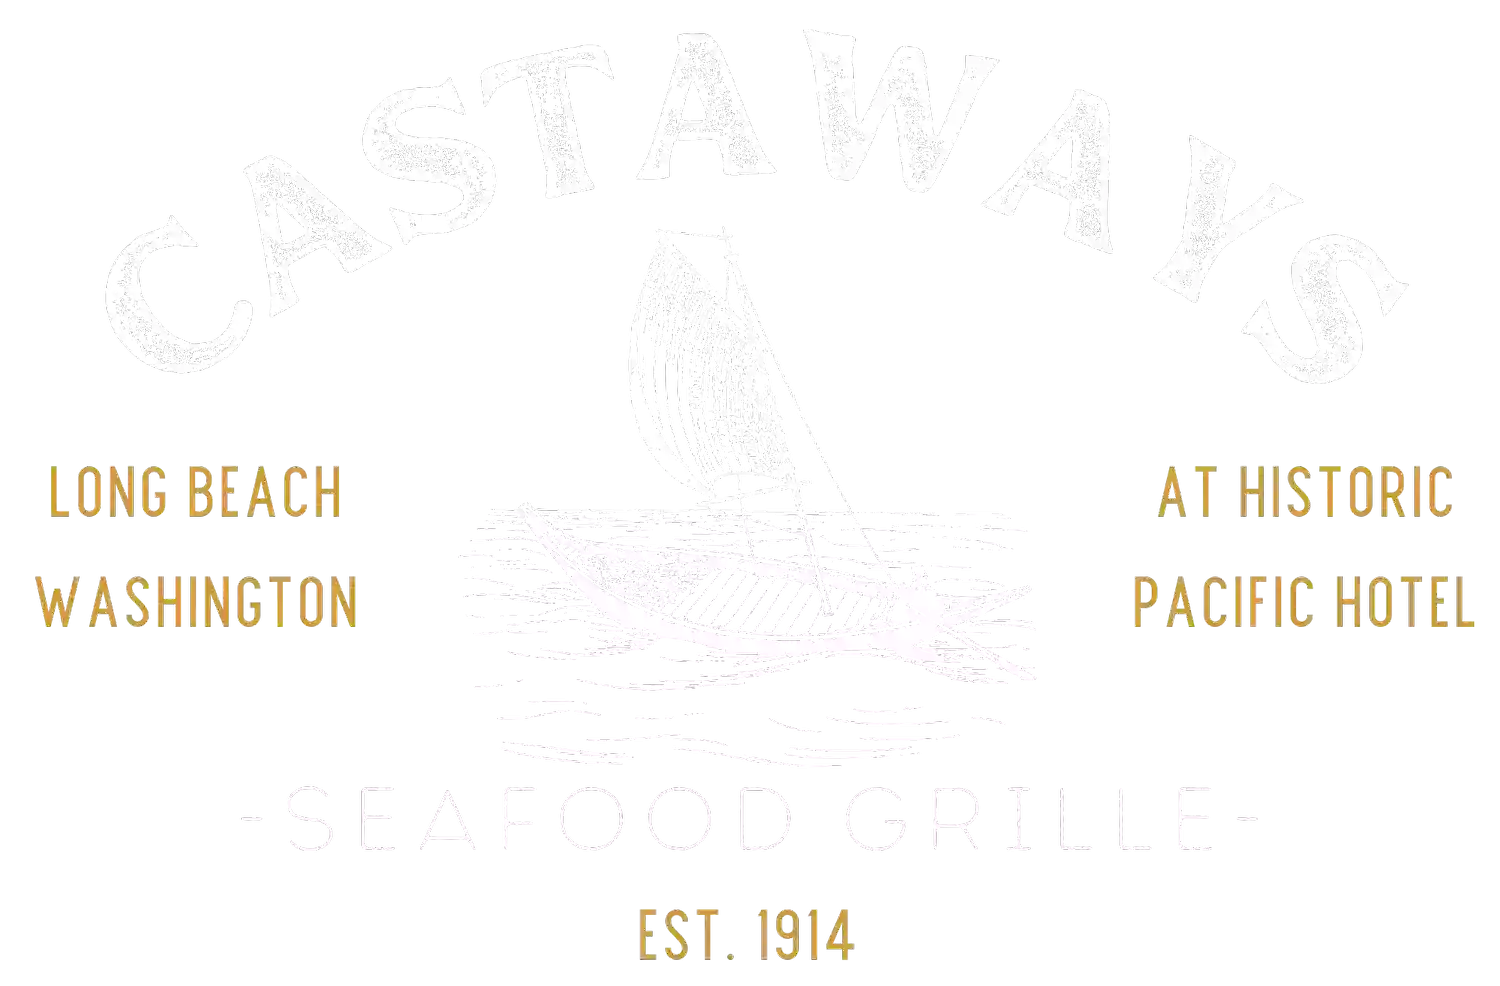 Castaway's Seafood Grille